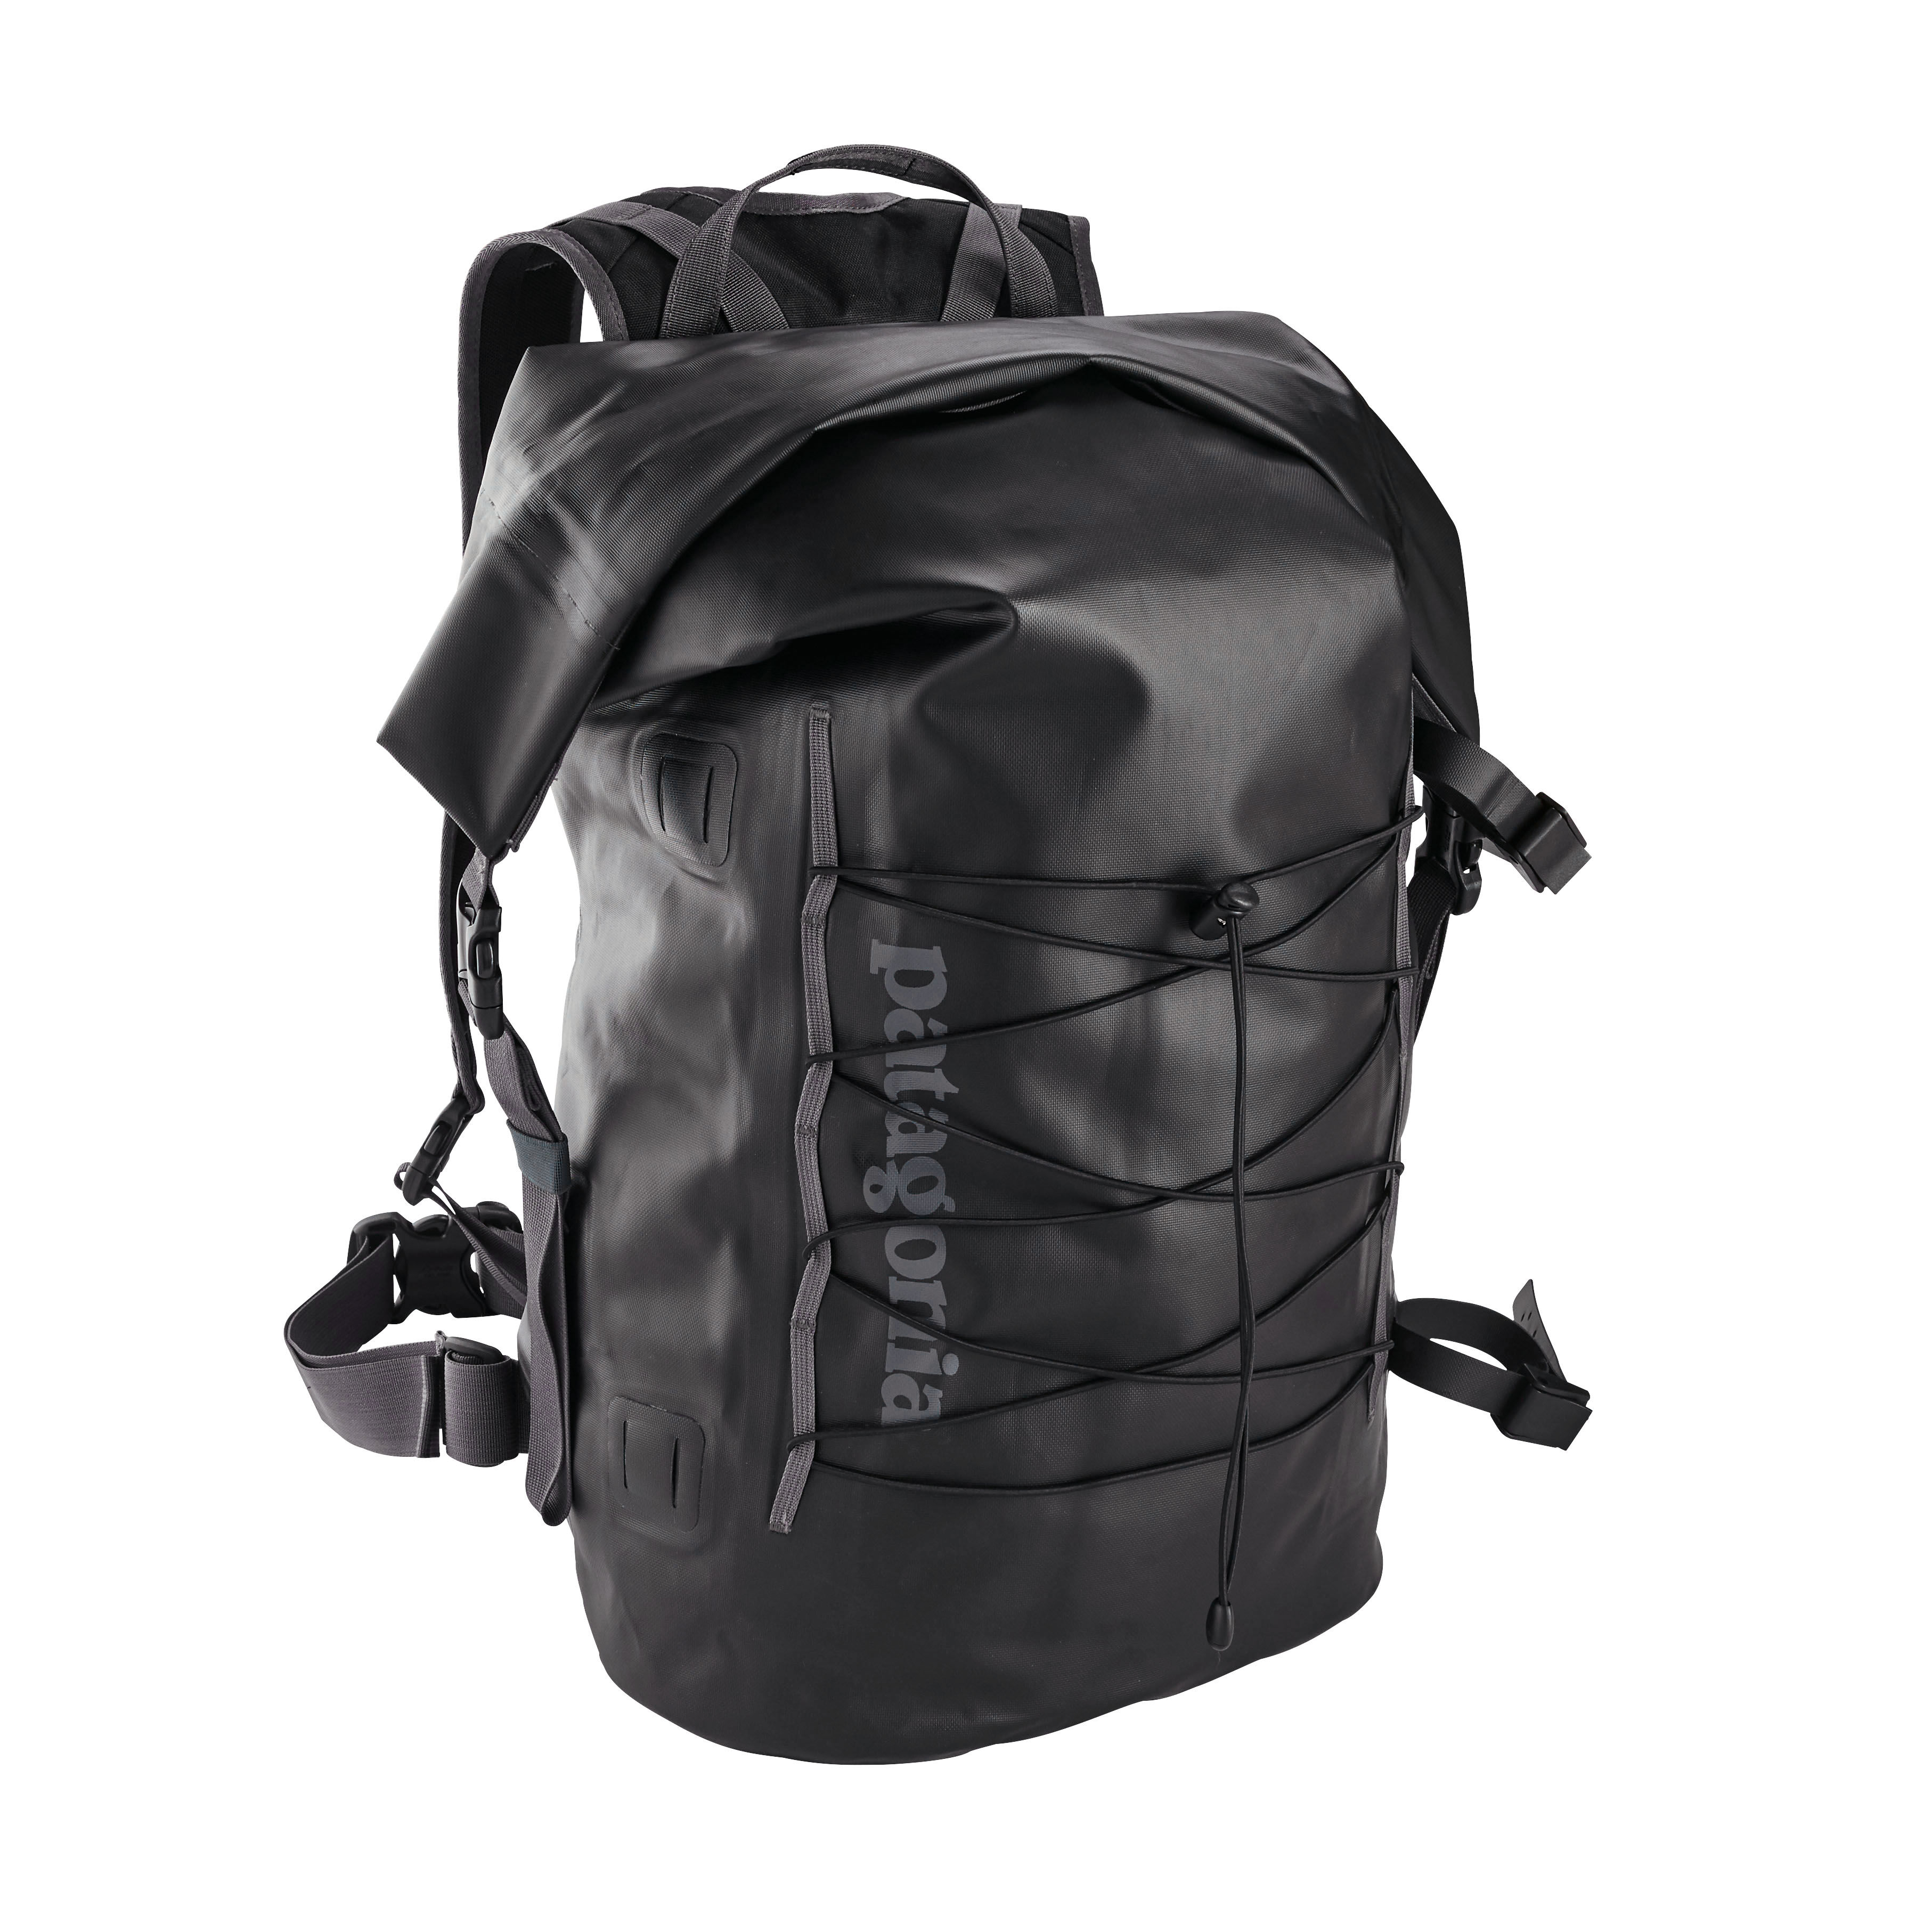 Patagonia Stormfront Roll Top Pack 45 L - Rugzak